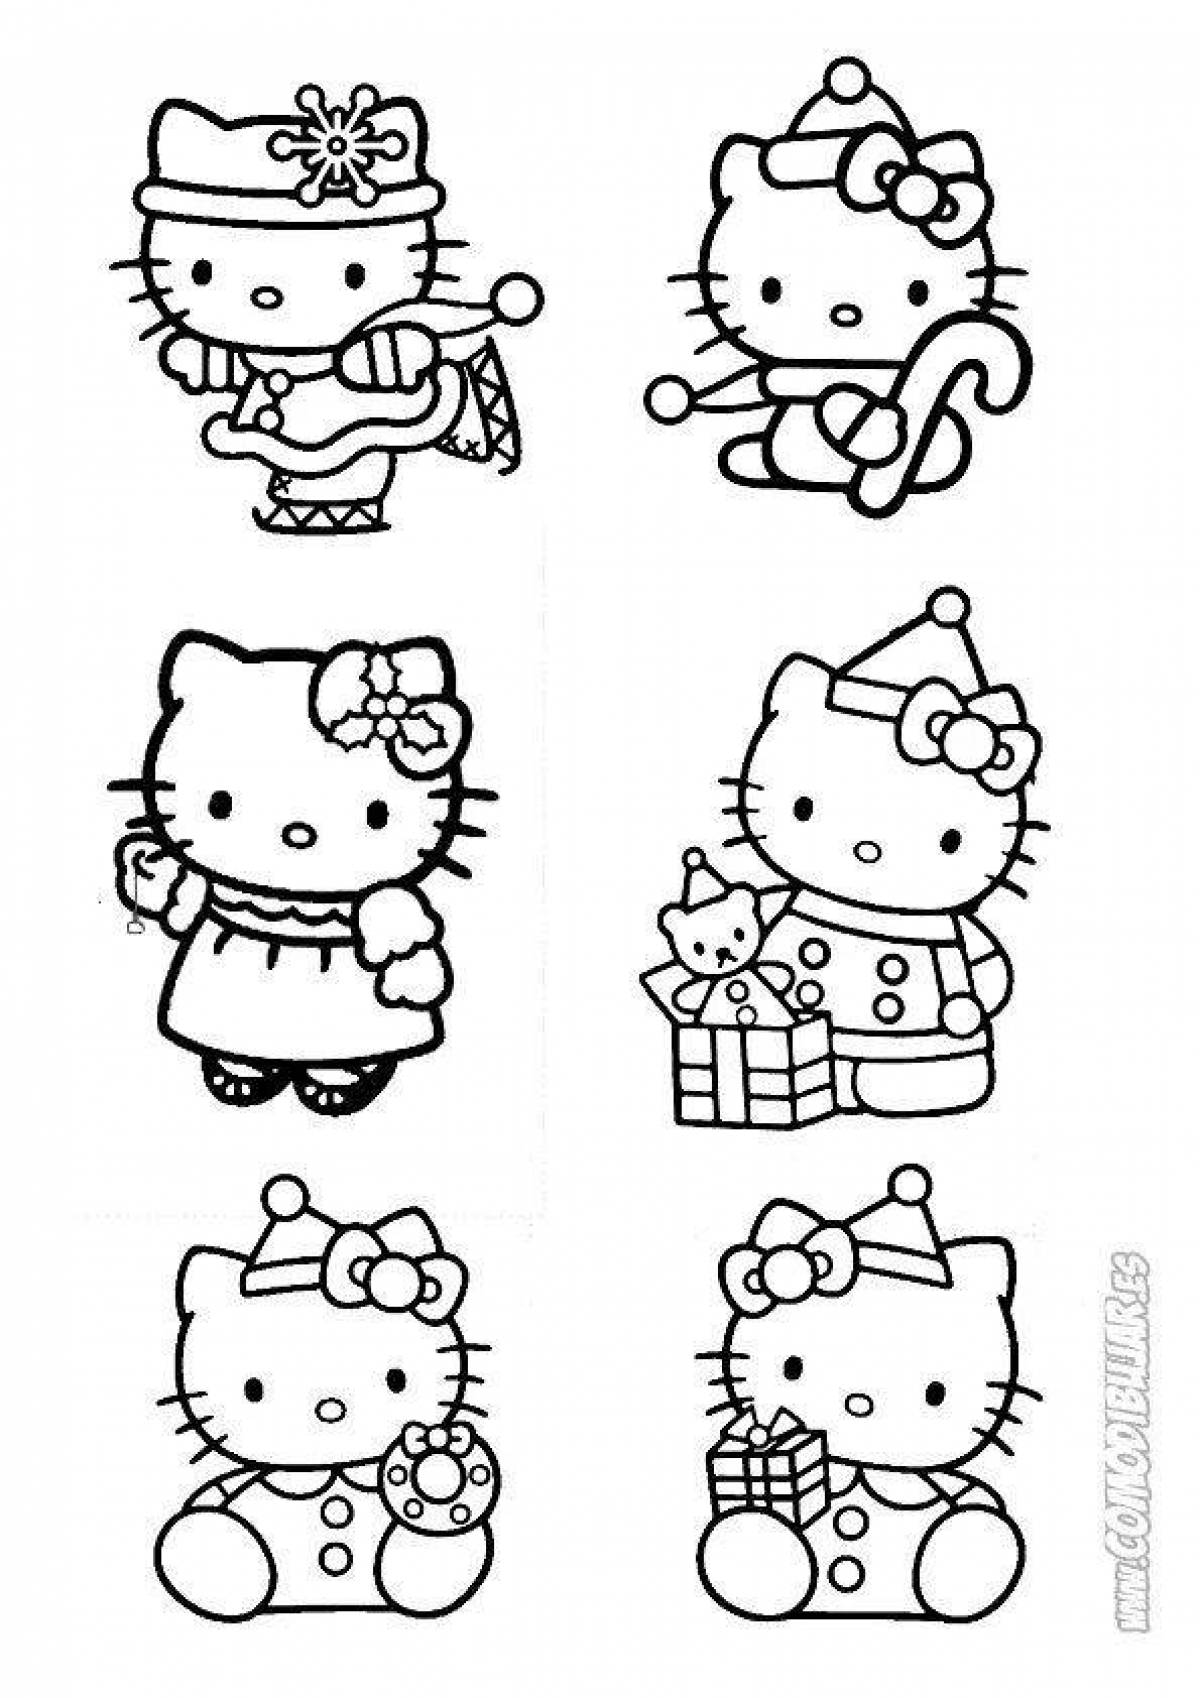 With hello kitty small #6